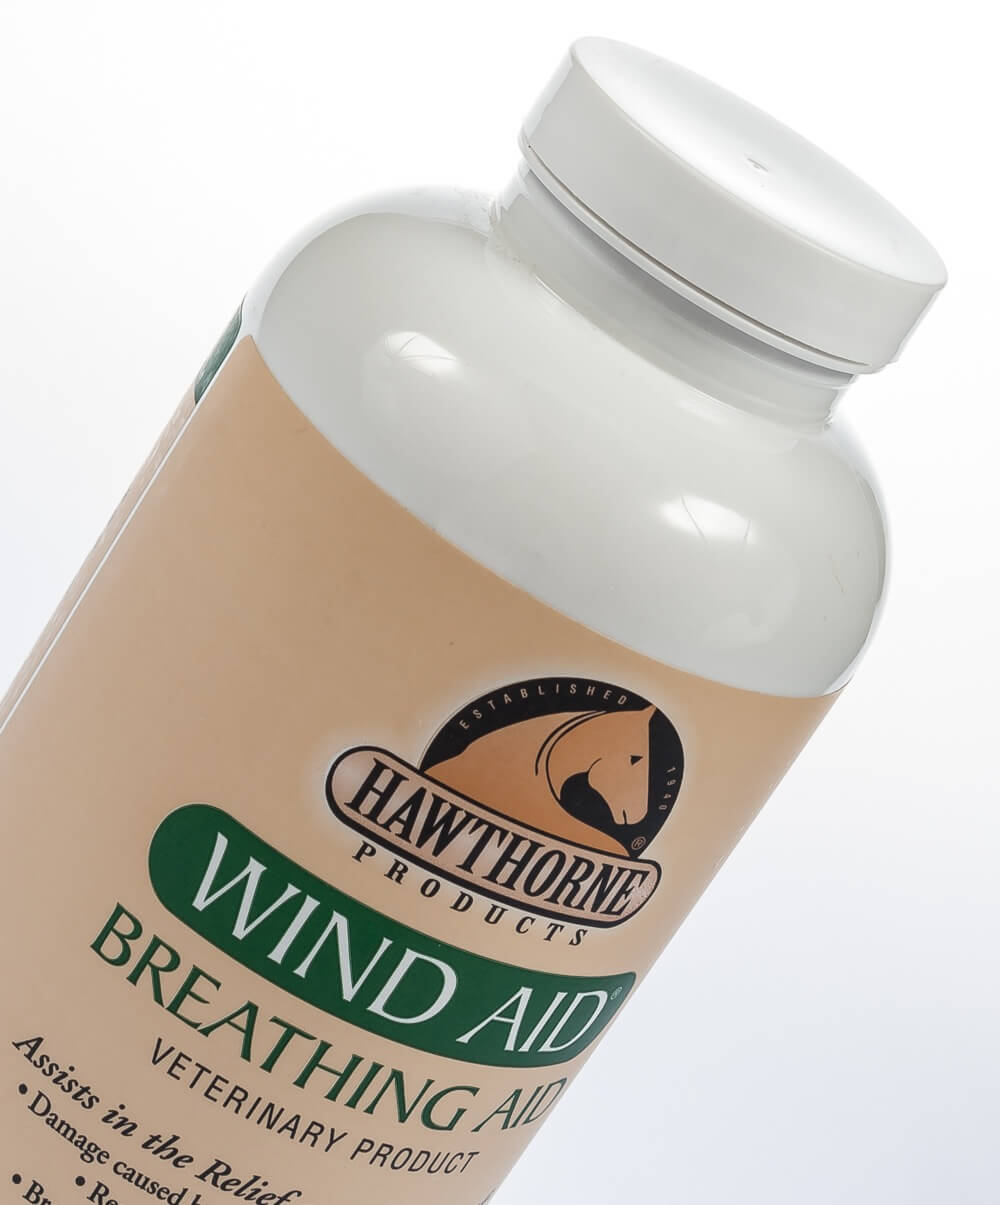 wind aid with dmg for dogs